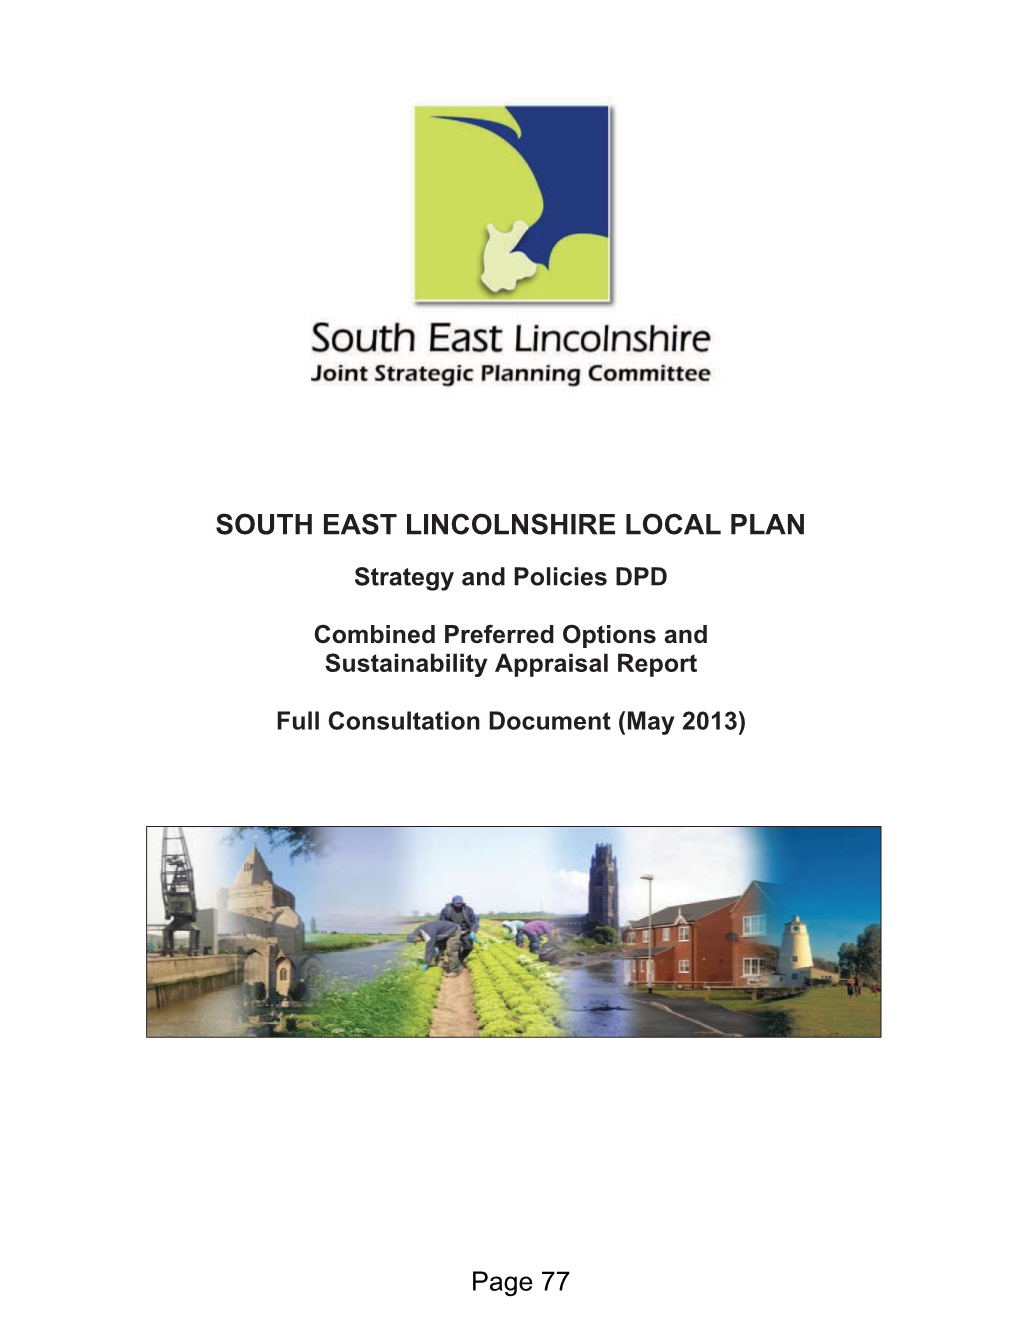 South East Lincolnshire Local Plan